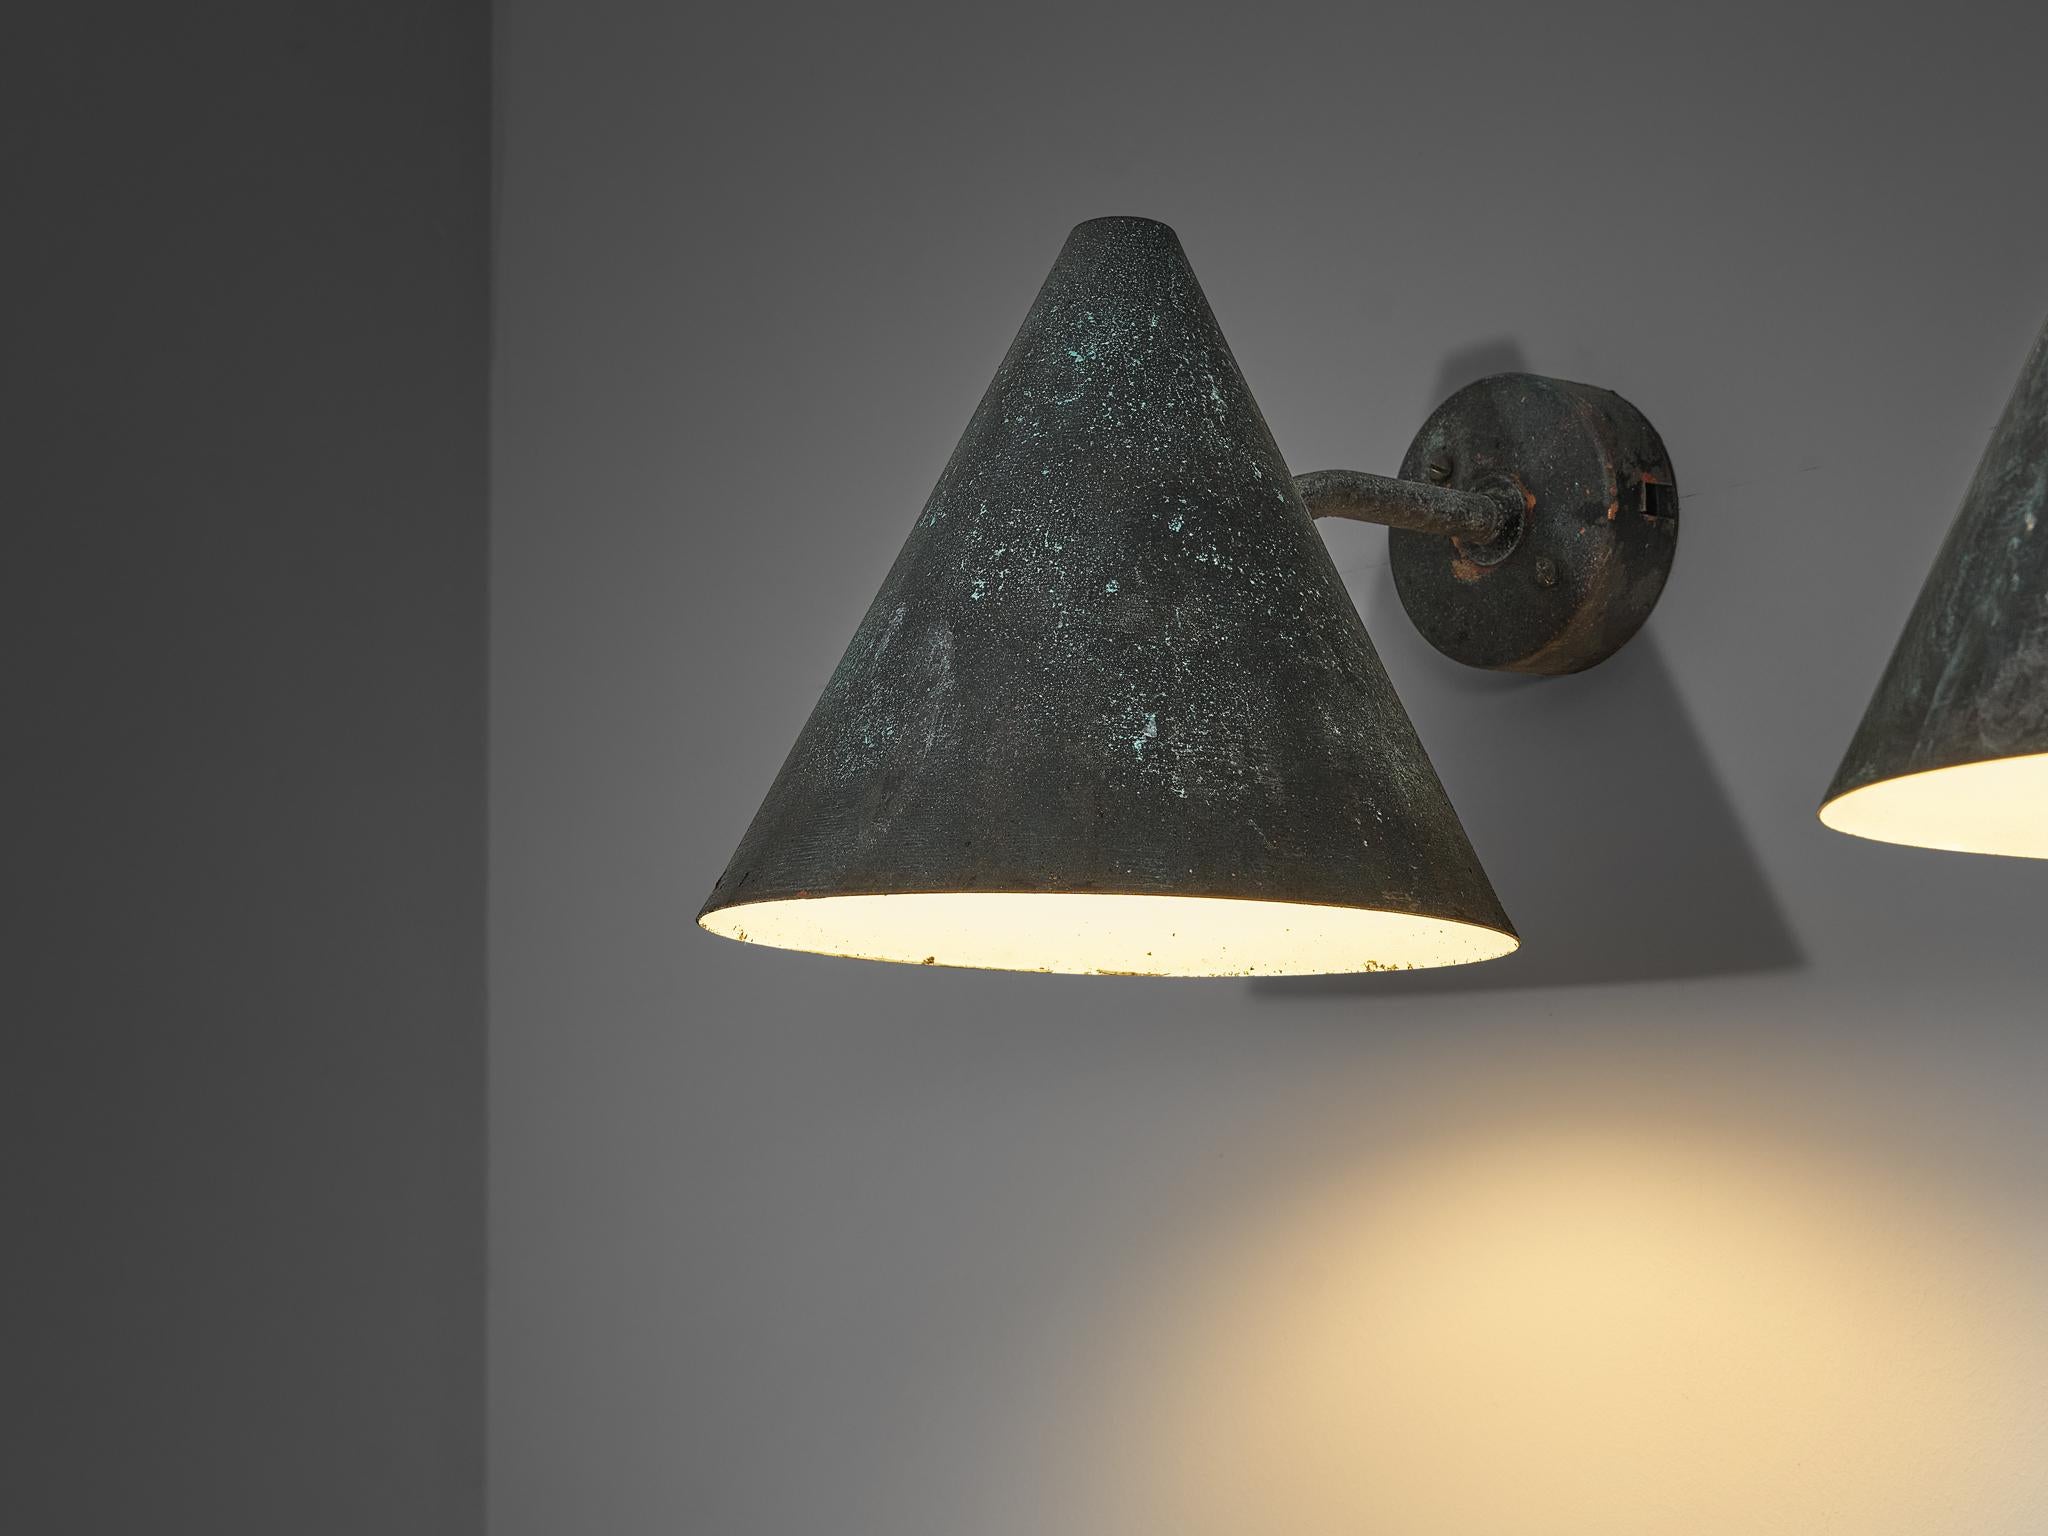  Hans-Agne Jakobsson 'Tratten' Wall Lights in Patinated Copper  6